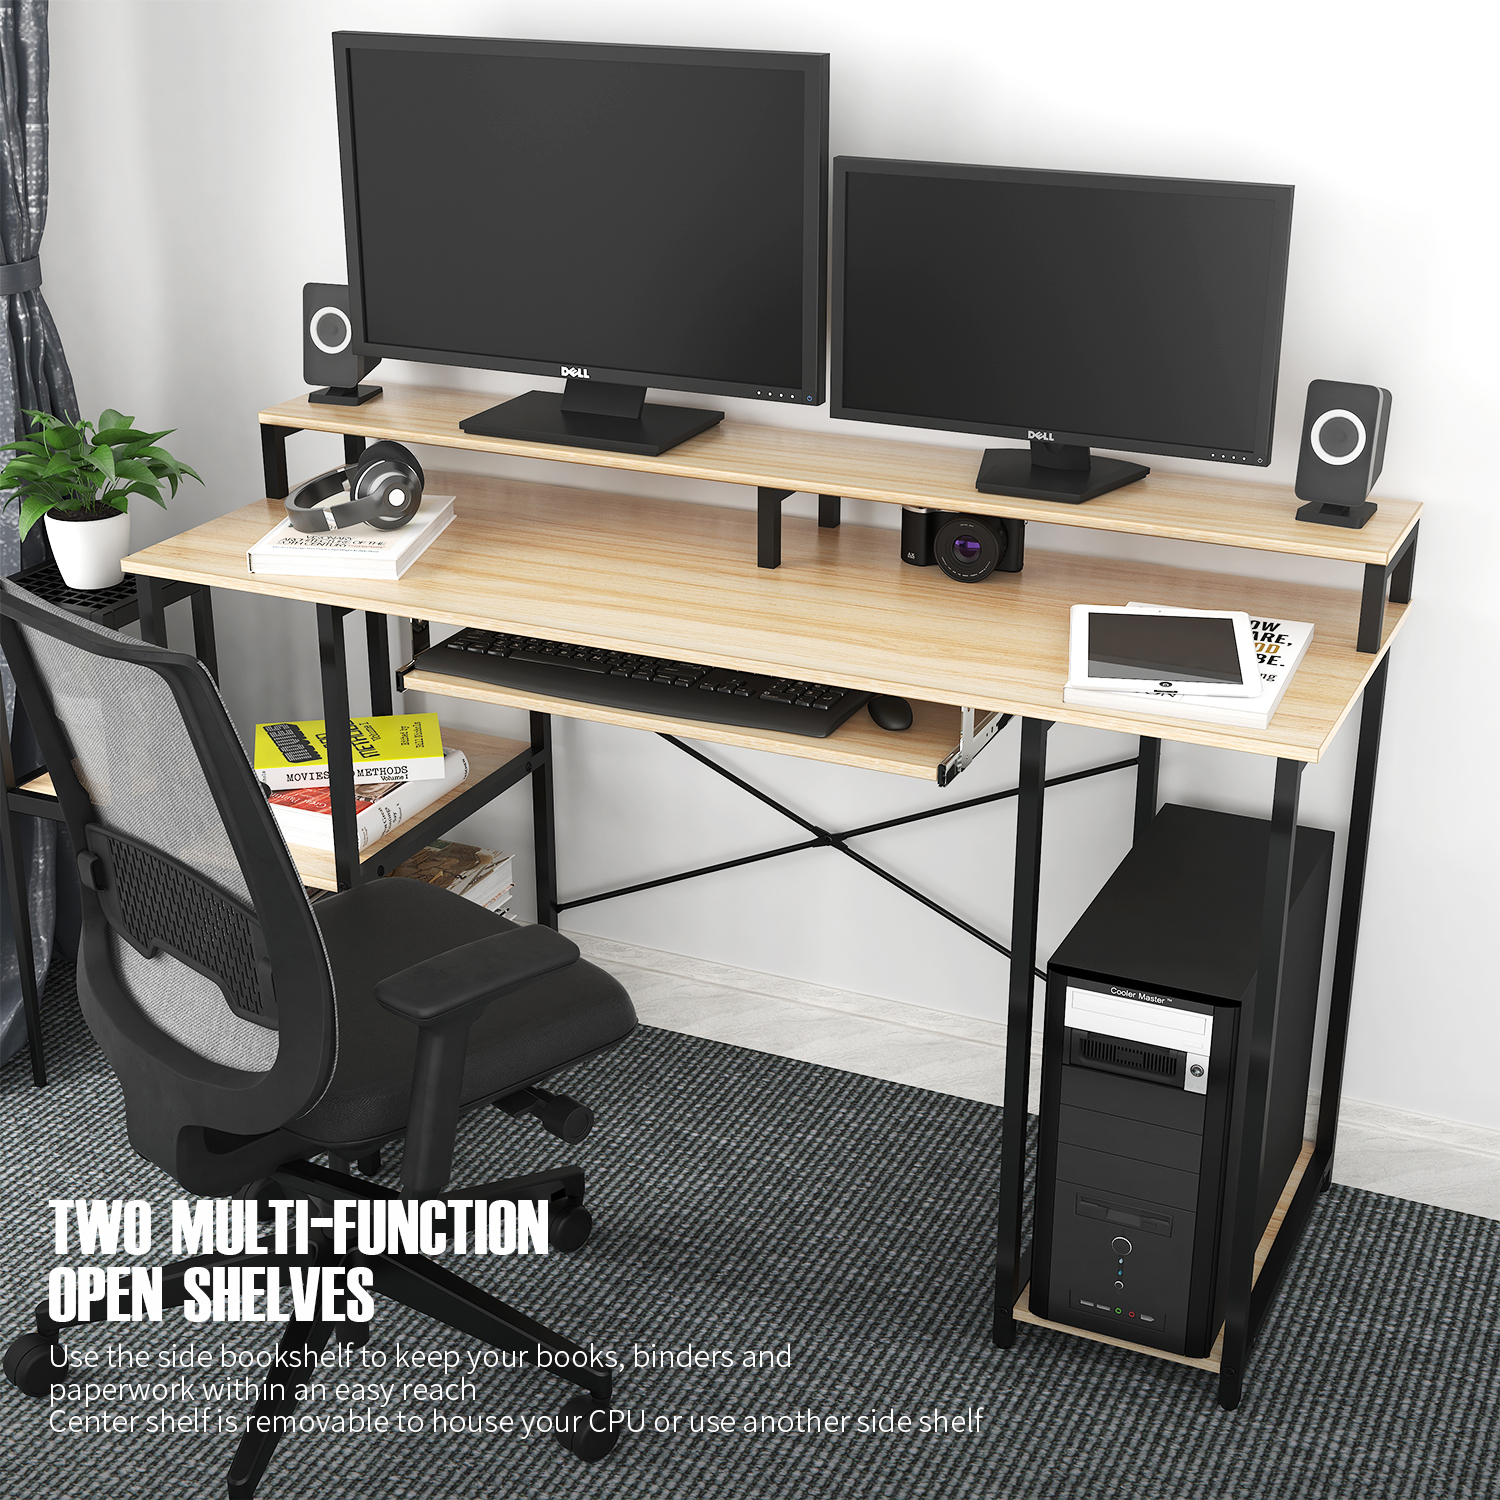 TOPSKY 54”Computer Desk with Storage Shelves/24.5" Keyboard Tray/Monitor Stand Study Table for Home Office S-205B